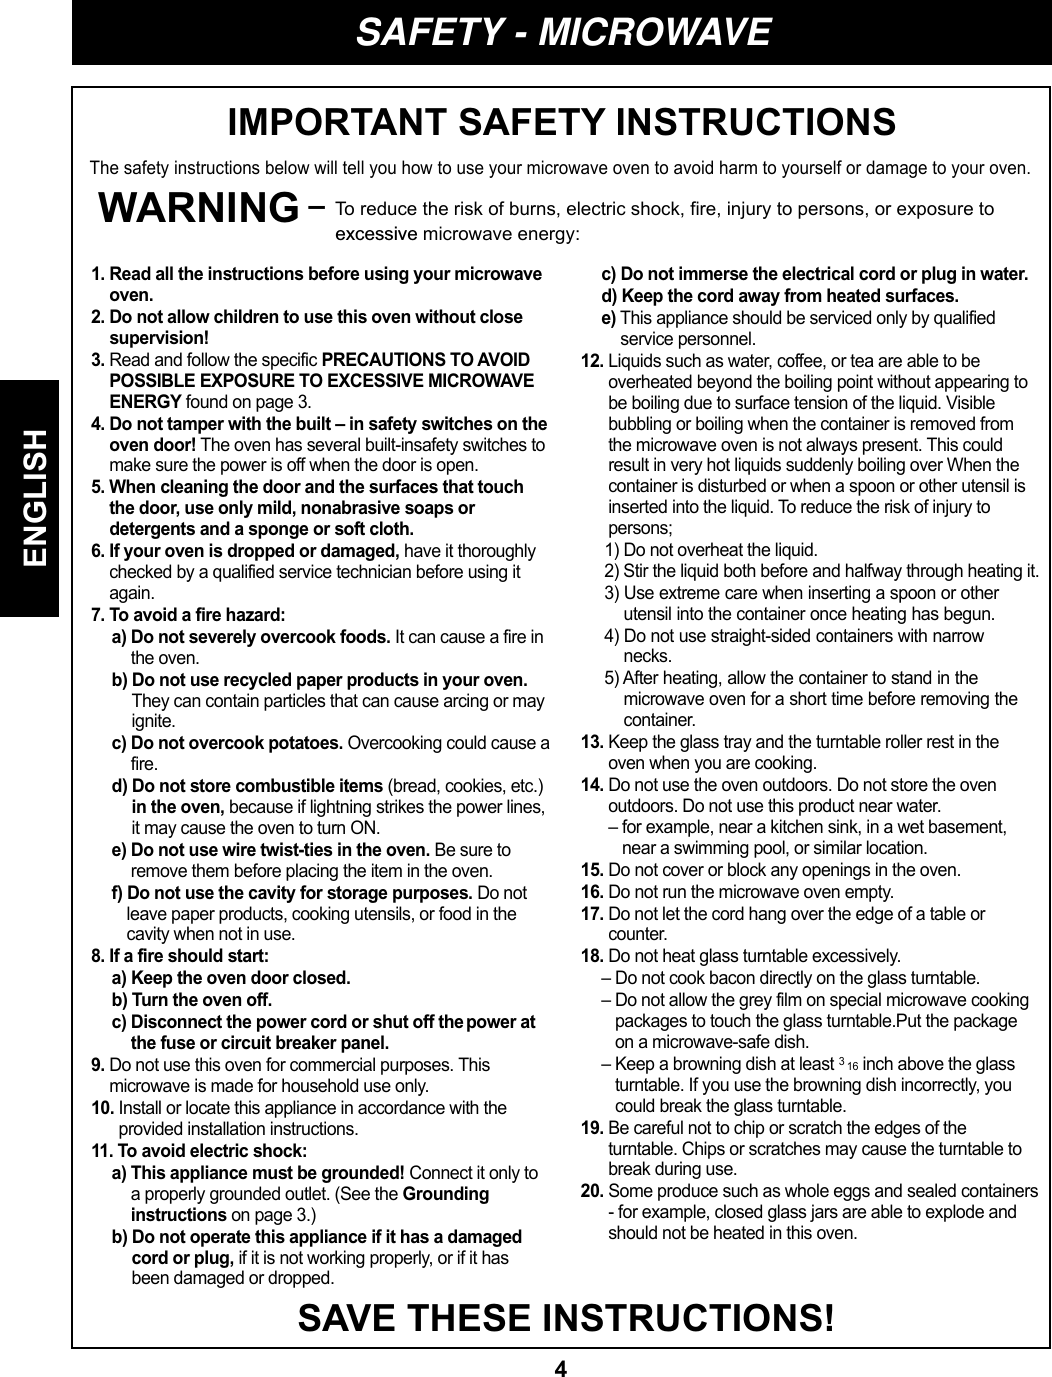 4ENGLISHSAFETY - MICROWAVEIMPORTANT SAFETY INSTRUCTIONSThe safety instructions below will tell you how to use your microwave oven to avoid harm to yourself or damage to your oven.WARNING – To reduce the risk of burns, electric shock, fire, injury to persons, or exposure to excessive microwave energy:SAVE THESE INSTRUCTIONS!1. Read all the instructions before using your microwaveoven.2. Do not allow children to use this oven without closesupervision!3. Read and follow the specific PRECAUTIONS TO AVOIDPOSSIBLE EXPOSURE TO EXCESSIVE MICROWAVEENERGY found on page 3.4. Do not tamper with the built – in safety switches on theoven door! The oven has several built-insafety switches tomake sure the power is off when the door is open.5. When cleaning the door and the surfaces that touchthe door, use only mild, nonabrasive soaps ordetergents and a sponge or soft cloth.6. If your oven is dropped or damaged, have it thoroughlychecked by a qualified service technician before using itagain.7. To avoid a fire hazard:a) Do not severely overcook foods. It can cause a fire inthe oven.b) Do not use recycled paper products in your oven.They can contain particles that can cause arcing or mayignite.c) Do not overcook potatoes. Overcooking could cause afire.d) Do not store combustible items (bread, cookies, etc.)in the oven, because if lightning strikes the power lines,it may cause the oven to turn ON.e) Do not use wire twist-ties in the oven. Be sure toremove them before placing the item in the oven.f) Do not use the cavity for storage purposes. Do notleave paper products, cooking utensils, or food in thecavity when not in use.8. If a fire should start:a) Keep the oven door closed.b) Turn the oven off.c) Disconnect the power cord or shut off thepower atthe fuse or circuit breaker panel.9. Do not use this oven for commercial purposes. Thismicrowave is made for household use only.10. Install or locate this appliance in accordance with theprovided installation instructions.11. To avoid electric shock:a) This appliance must be grounded! Connect it only toa properly grounded outlet. (See the Groundinginstructions on page 3.)b) Do not operate this appliance if it has a damagedcord or plug, if it is not working properly, or if it hasbeen damaged or dropped.c) Do not immerse the electrical cord or plug in water.d) Keep the cord away from heated surfaces.e) This appliance should be serviced only by qualifiedservice personnel.12. Liquids such as water, coffee, or tea are able to beoverheated beyond the boiling point without appearing tobe boiling due to surface tension of the liquid. Visiblebubbling or boiling when the container is removed fromthe microwave oven is not always present. This couldresult in very hot liquids suddenly boiling over When thecontainer is disturbed or when a spoon or other utensil isinserted into the liquid. To reduce the risk of injury topersons; 1) Do not overheat the liquid.  2) Stir the liquid both before and halfway through heating it. 3) Use extreme care when inserting a spoon or otherutensil into the container once heating has begun.4) Do not use straight-sided containers with narrownecks. 5) After heating, allow the container to stand in themicrowave oven for a short time before removing thecontainer. 13. Keep the glass tray and the turntable roller rest in theoven when you are cooking.14. Do not use the oven outdoors. Do not store the ovenoutdoors. Do not use this product near water.– for example, near a kitchen sink, in a wet basement,near a swimming pool, or similar location.15. Do not cover or block any openings in the oven.16. Do not run the microwave oven empty.17. Do not let the cord hang over the edge of a table orcounter.18. Do not heat glass turntable excessively.– Do not cook bacon directly on the glass turntable.– Do not allow the grey film on special microwave cookingpackages to touch the glass turntable.Put the packageon a microwave-safe dish.– Keep a browning dish at least 3 16 inch above the glassturntable. If you use the browning dish incorrectly, youcould break the glass turntable.19. Be careful not to chip or scratch the edges of theturntable. Chips or scratches may cause the turntable tobreak during use.20. Some produce such as whole eggs and sealed containers- for example, closed glass jars are able to explode andshould not be heated in this oven.